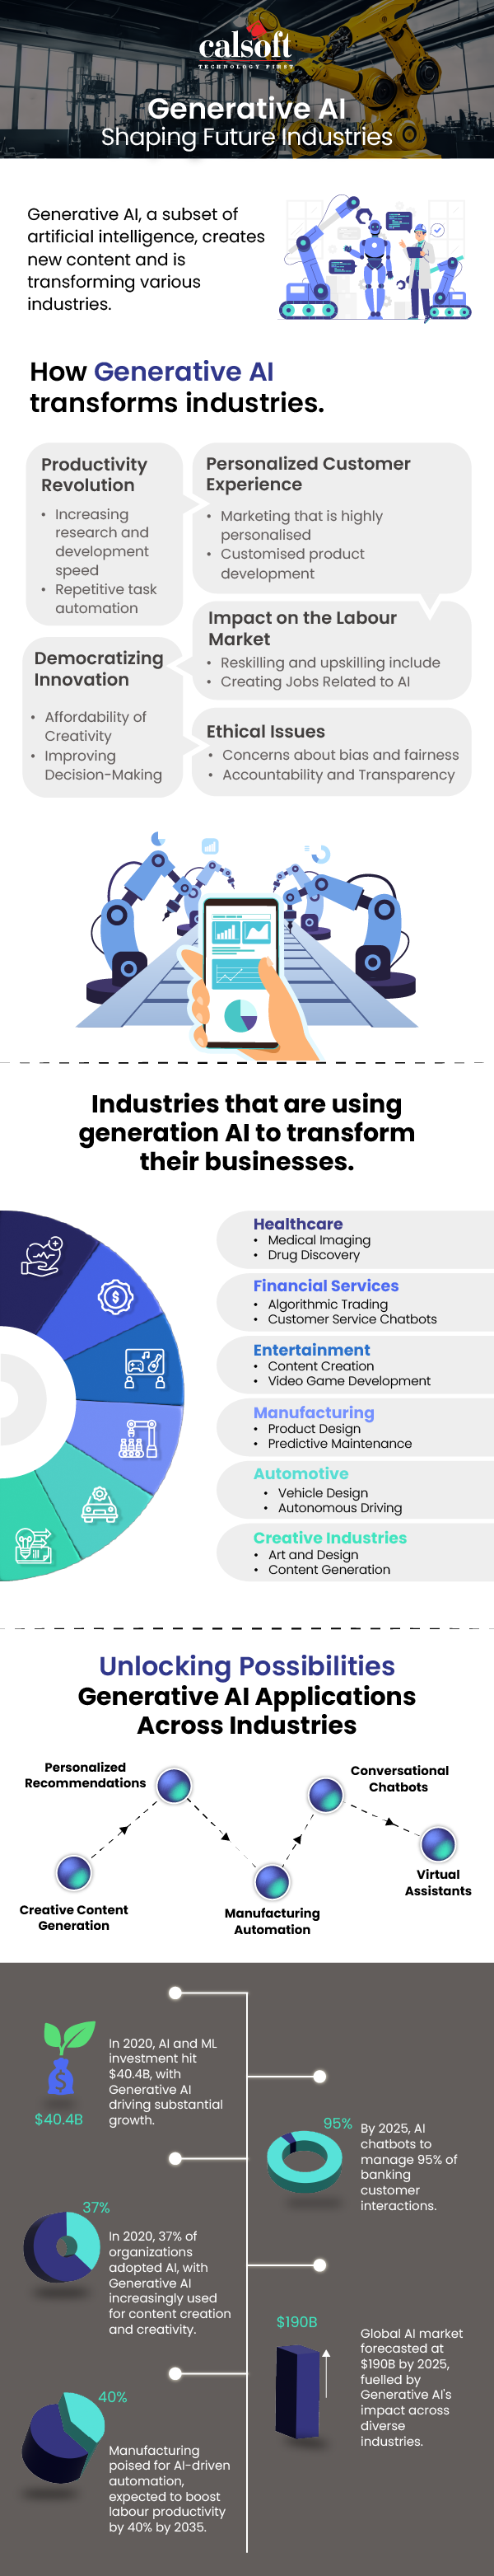 [Infoblog] Generative AI Shaping Future Industries